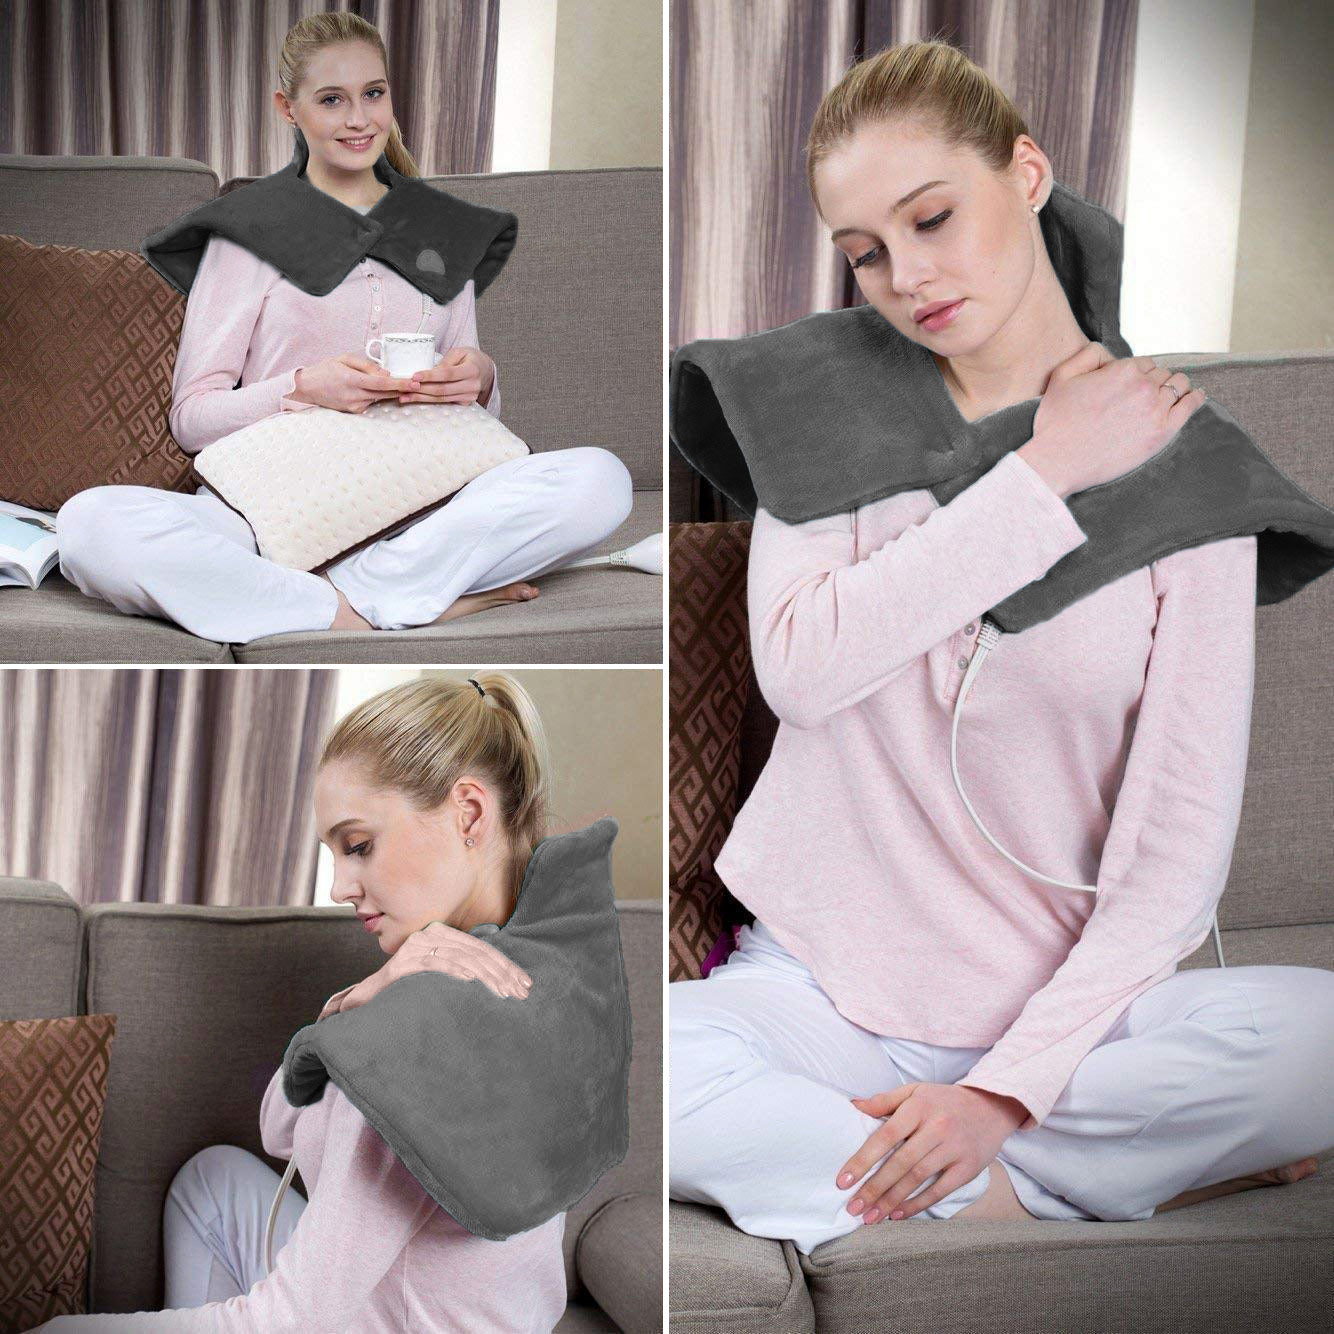 Dr Relief by SUNAID Electric Neck and Shoulders Warmer Heating Pad (18"x25") Fast-Heating Technology, 3 Heat Settings, Moist Heat Therapy Option, Fast Heating, Convenient Storage Bag (Gray)